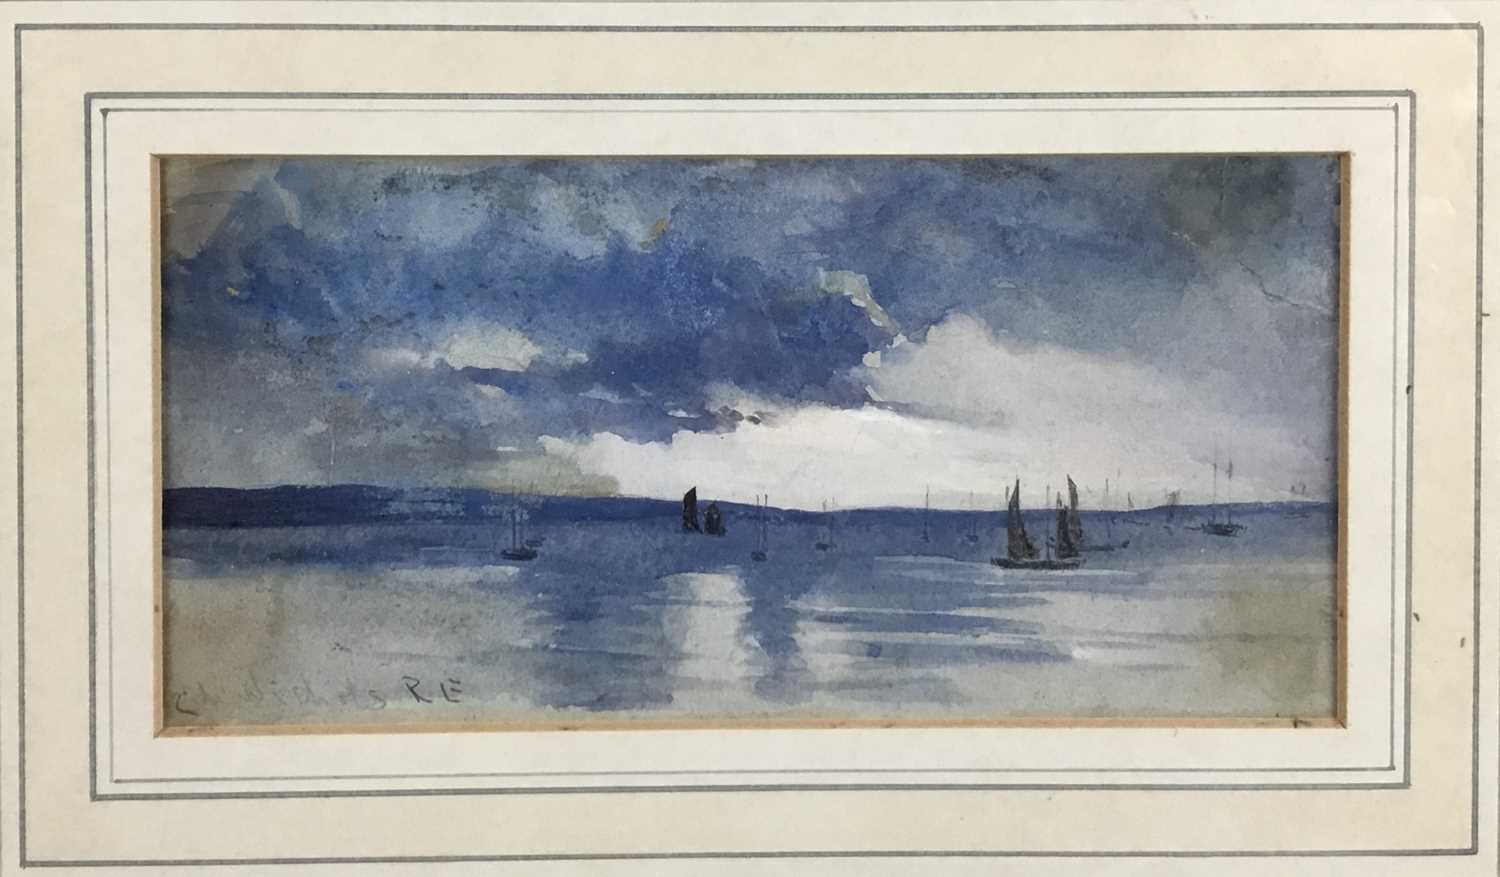 Lot 78 - C M Nichols, signed watercolour, marine scene, 18.5cm x 9cm together with a monochrome watercolour of shepherd in a landscape, 21.5cm x 16cm both mounted in glazed frames